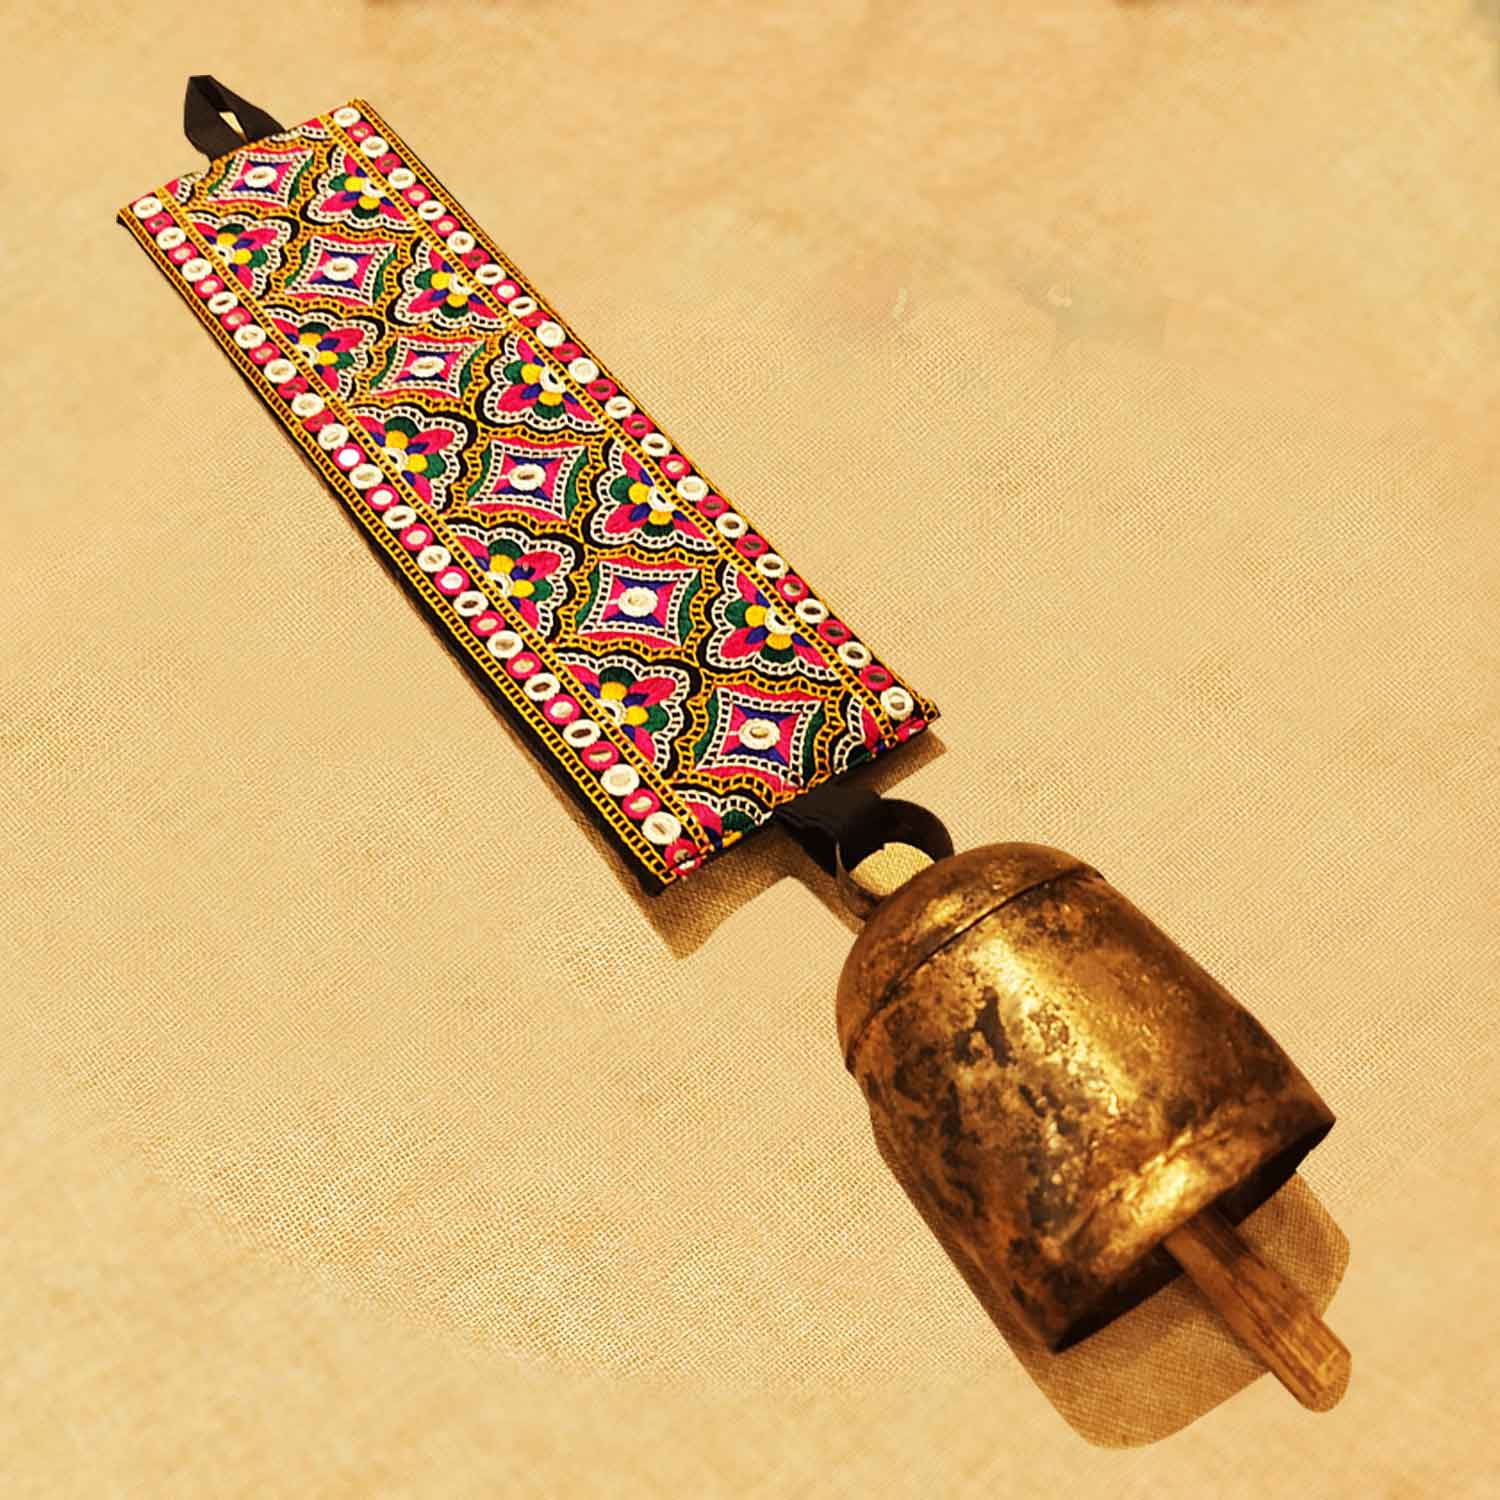 The Bombay Store Cow Door Bell with Kantha Embroidery on Belt